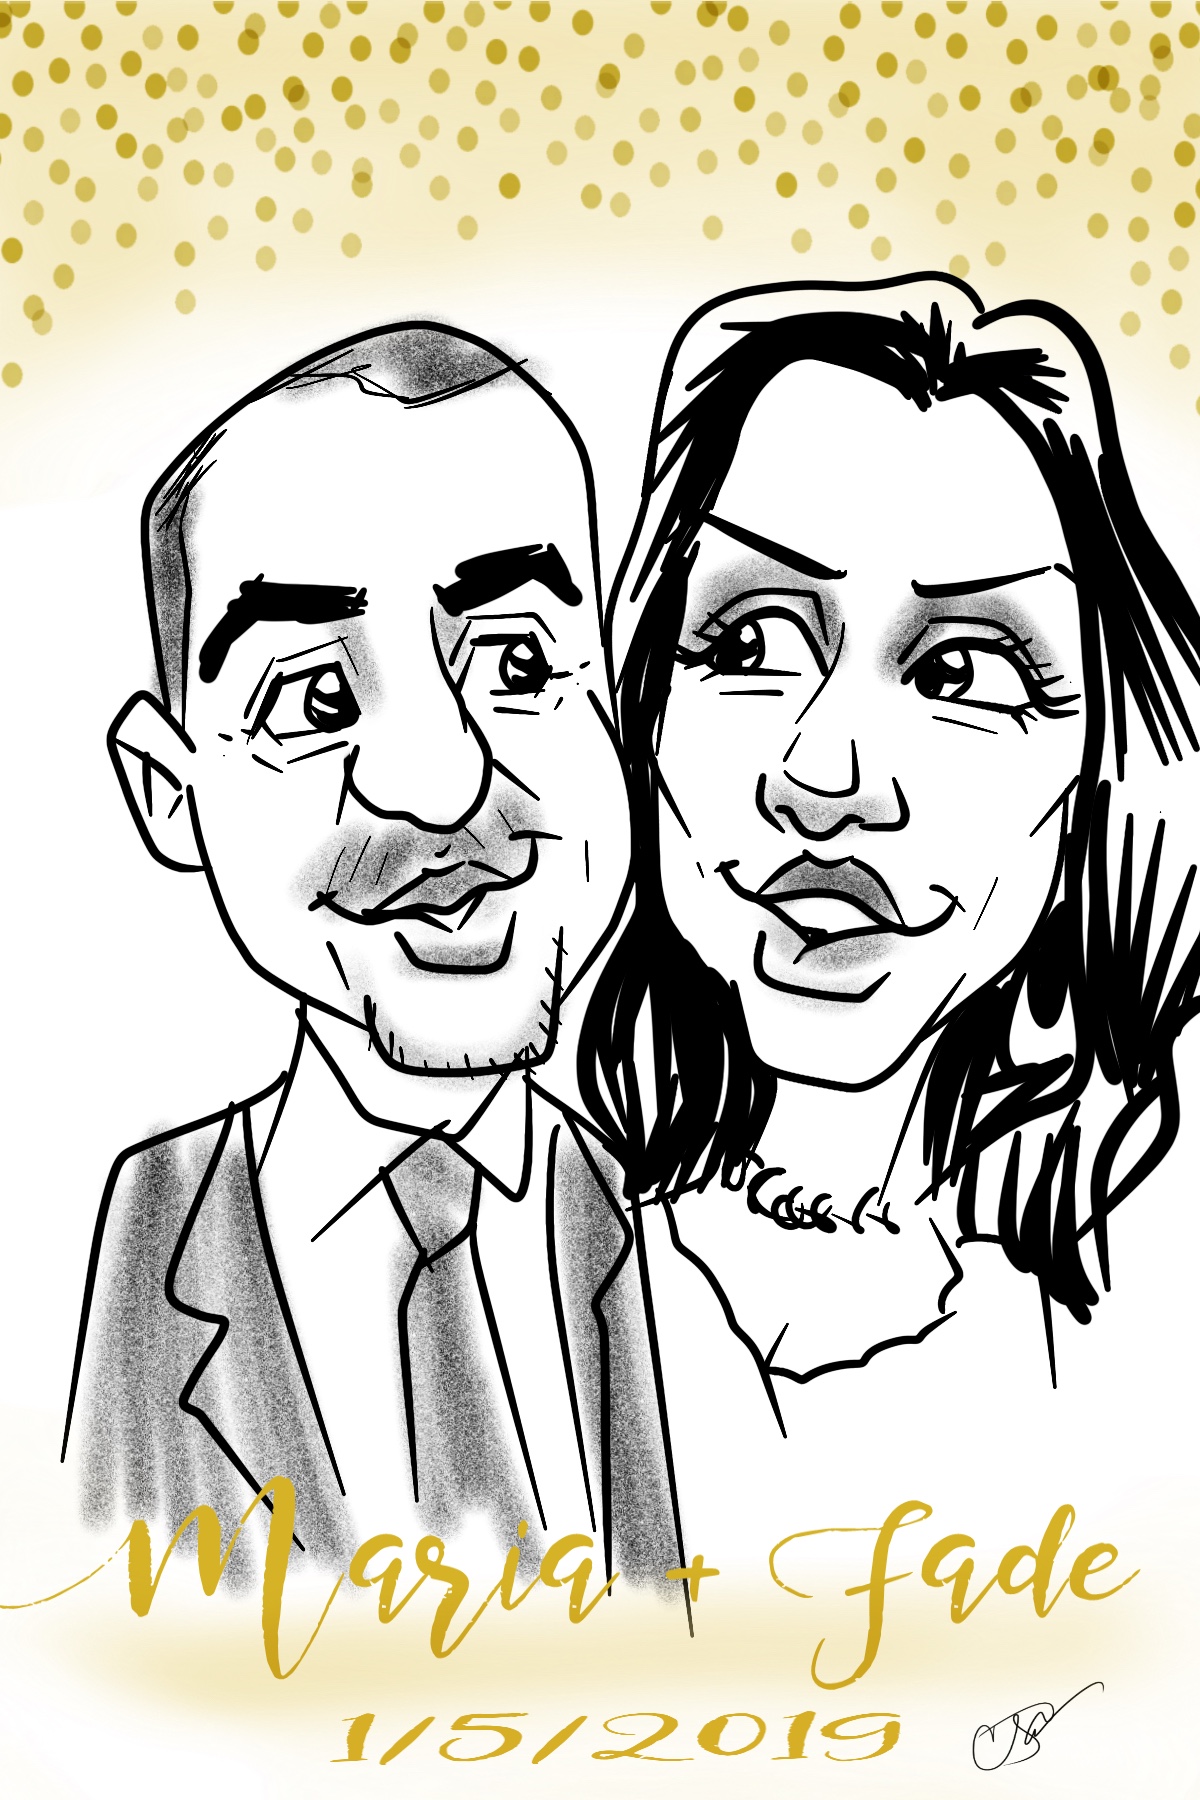 Digital caricature of a couple at a wedding reception